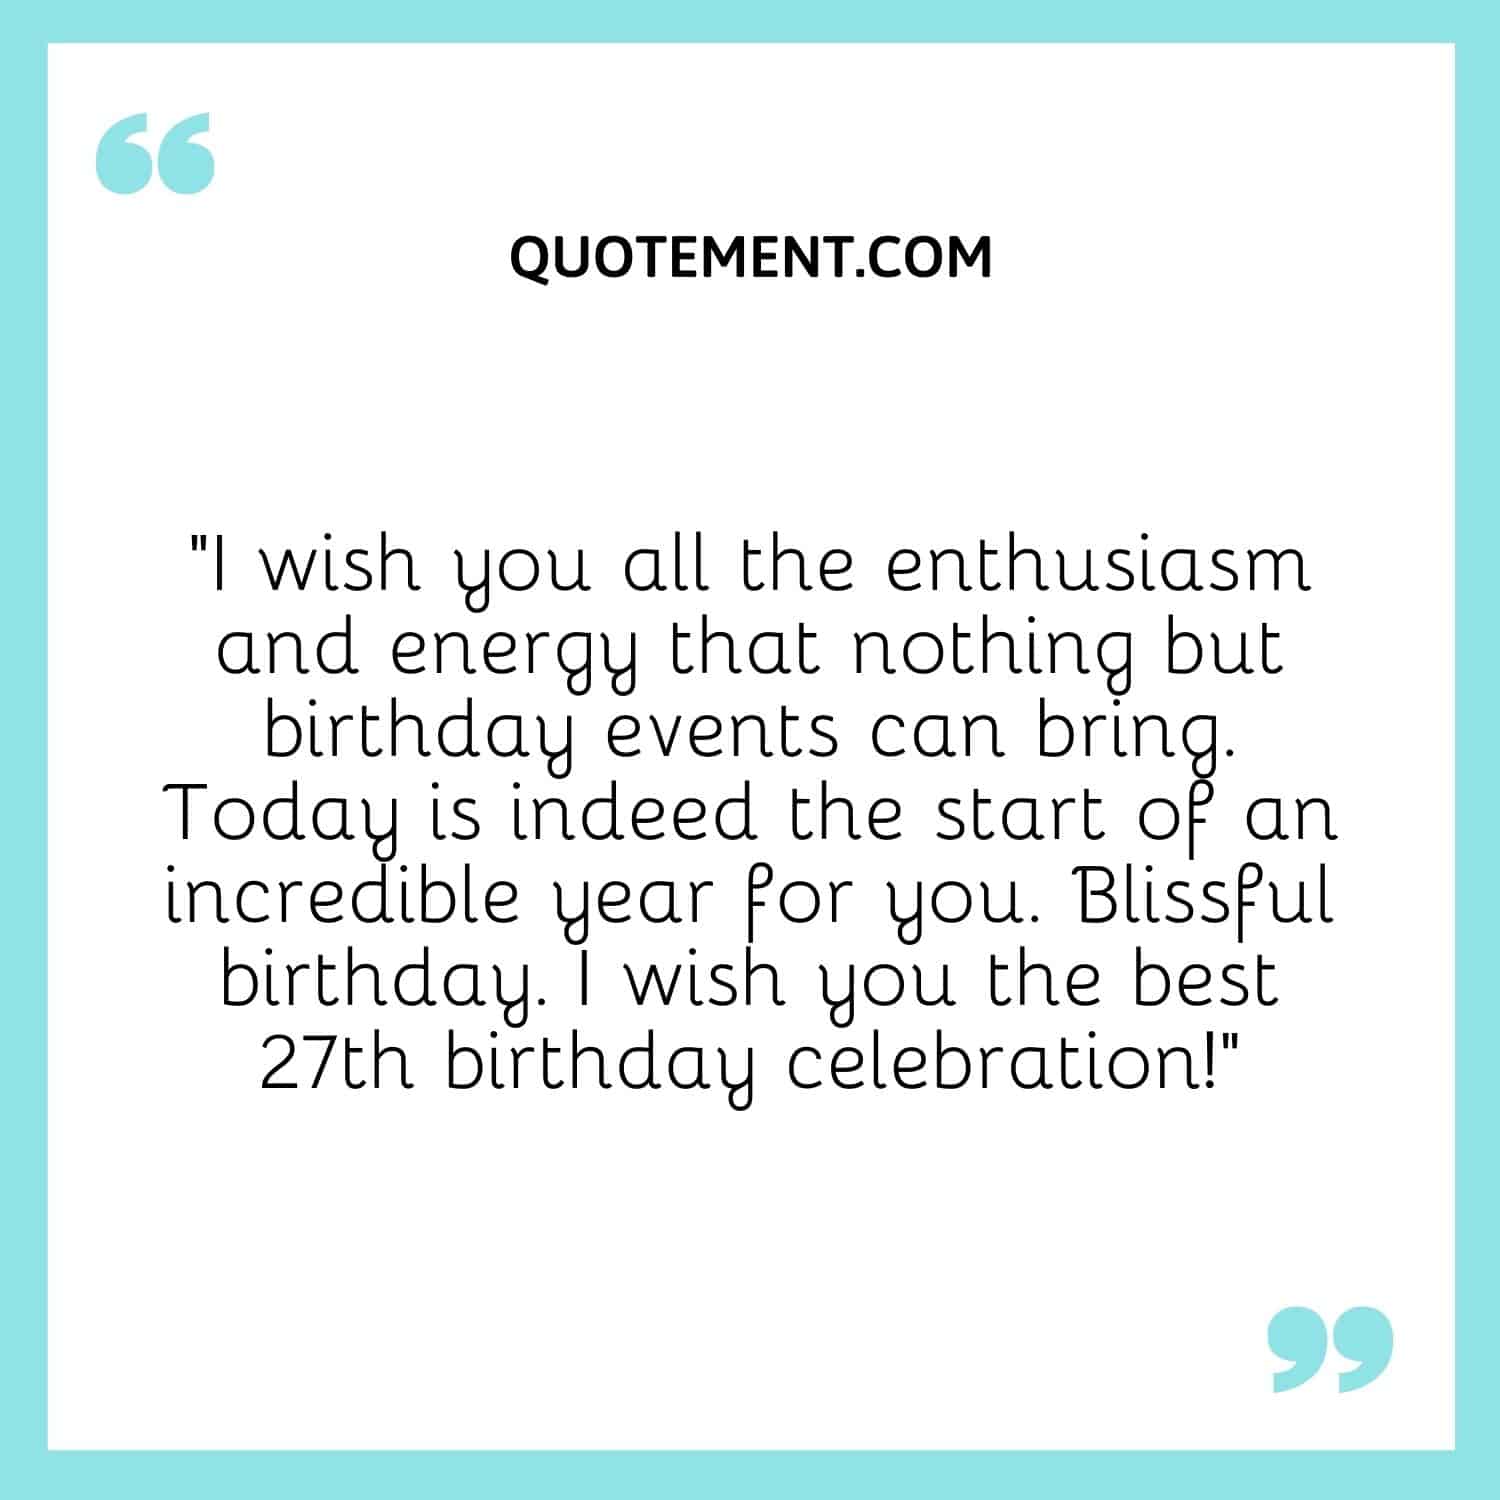 I wish you all the enthusiasm and energy that nothing but birthday events can bring.